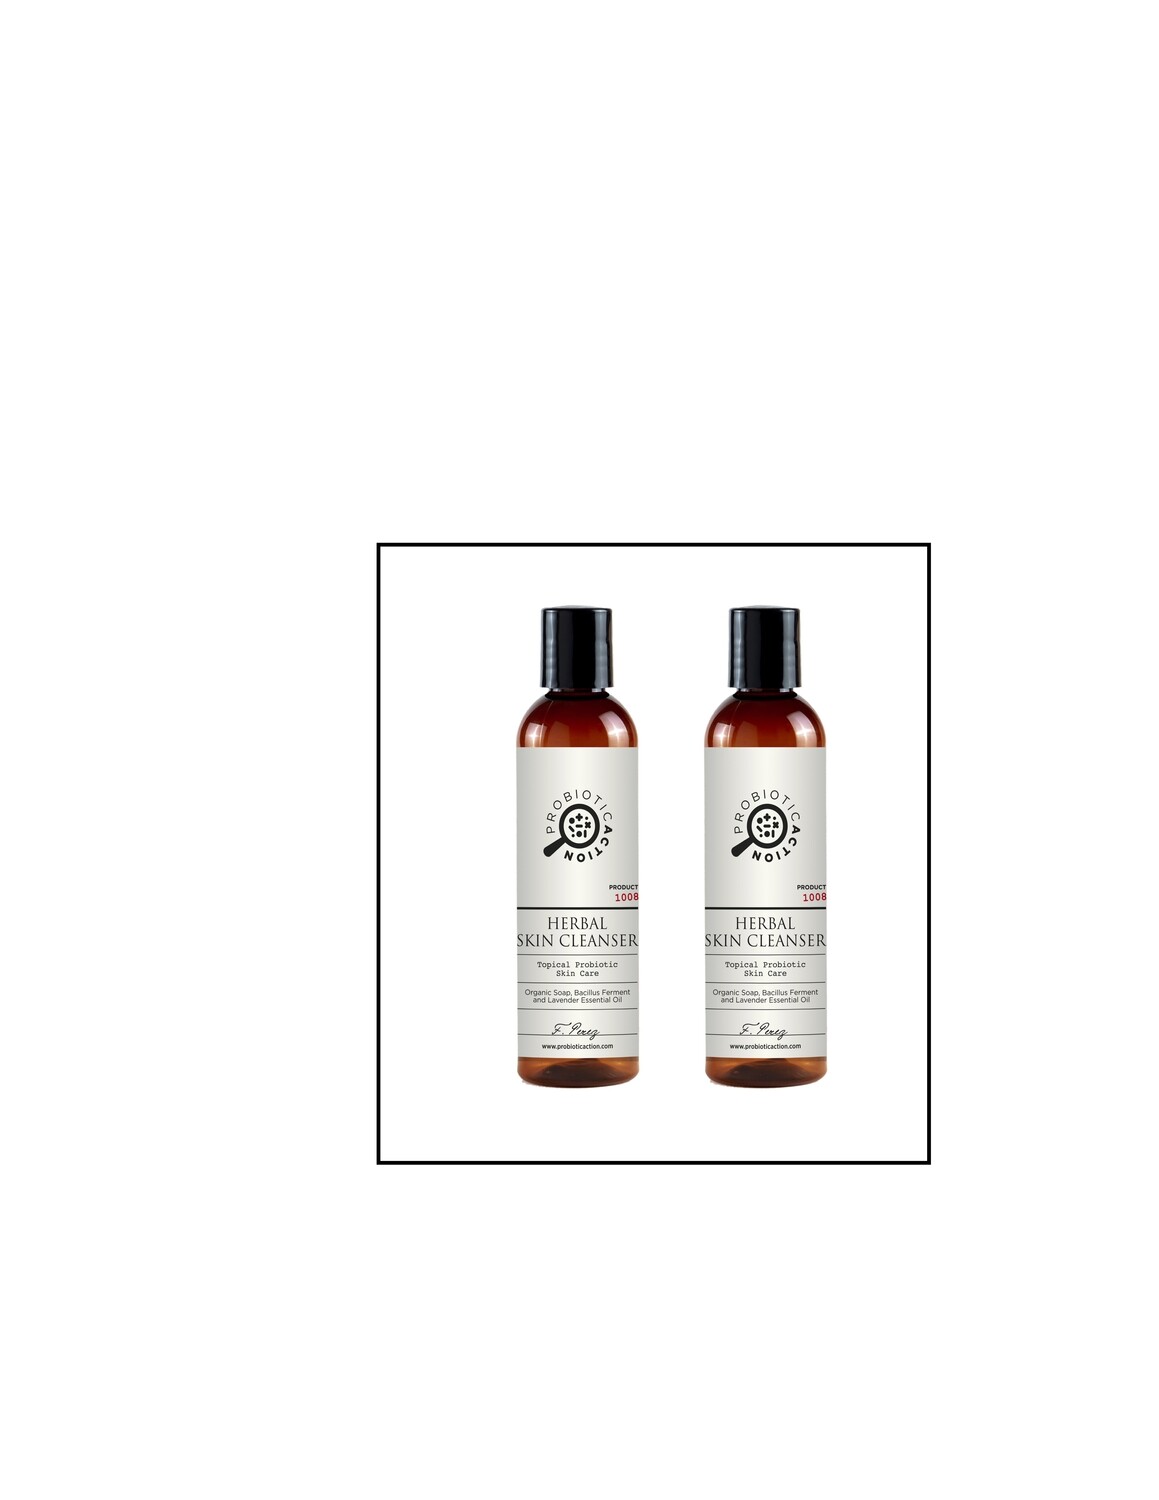 Pack of 2 - Herbal Skin Cleanser - Topical Probiotic Skin Care. Deeply Purifying. Totally Organic.